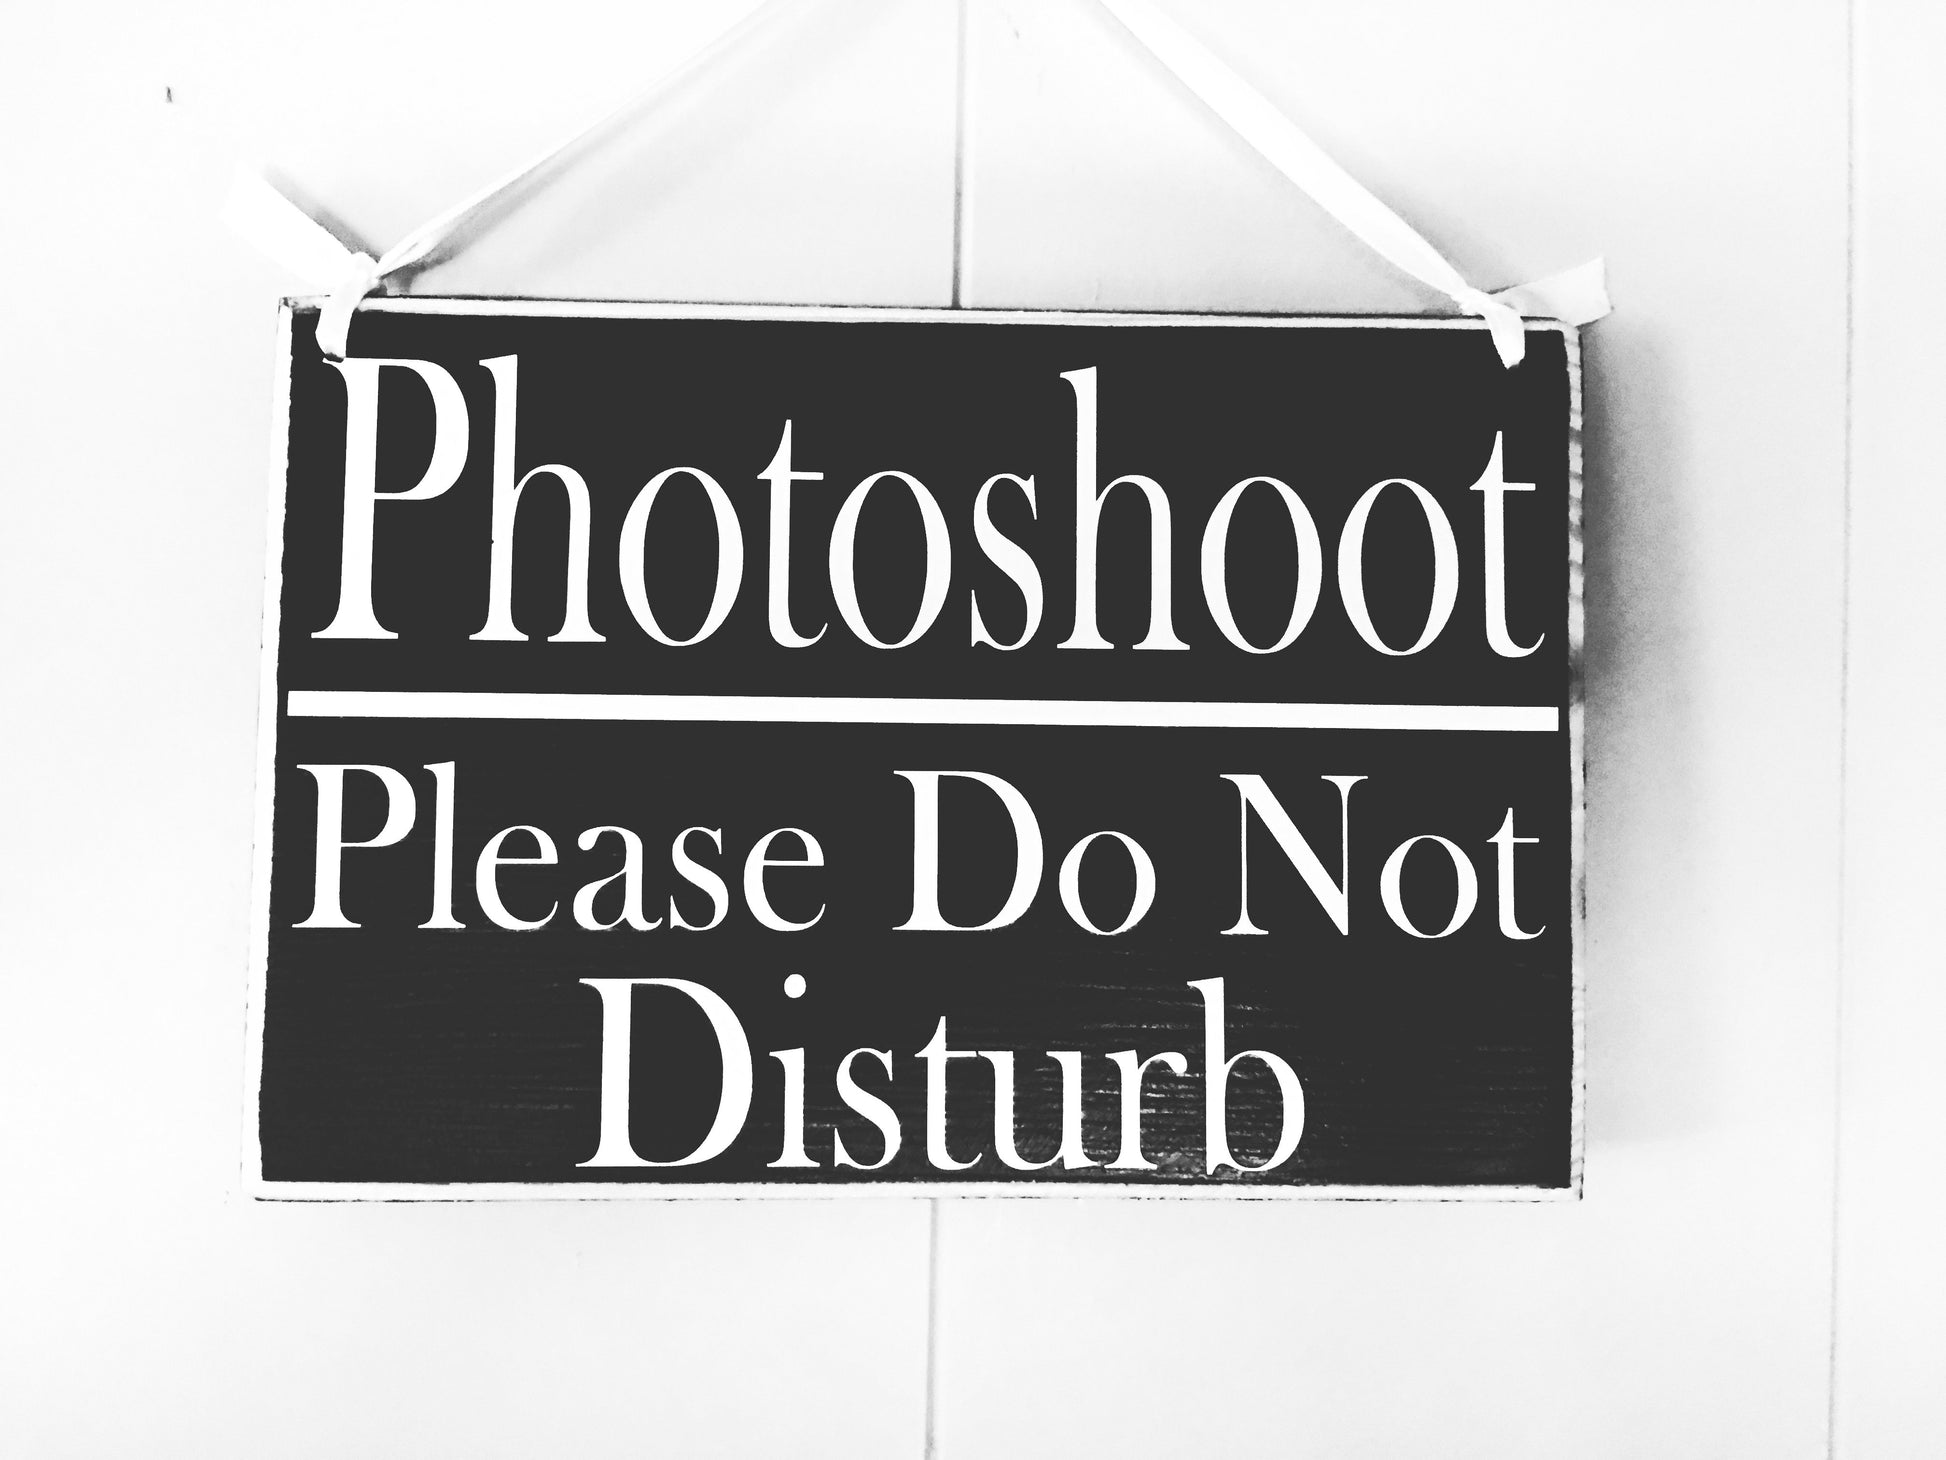 8x6 Photoshoot Please Do Not Disturb Custom Wood Sign In Session Modeling Progress Magazine Photography Testing Silence Quiet Door Plaque